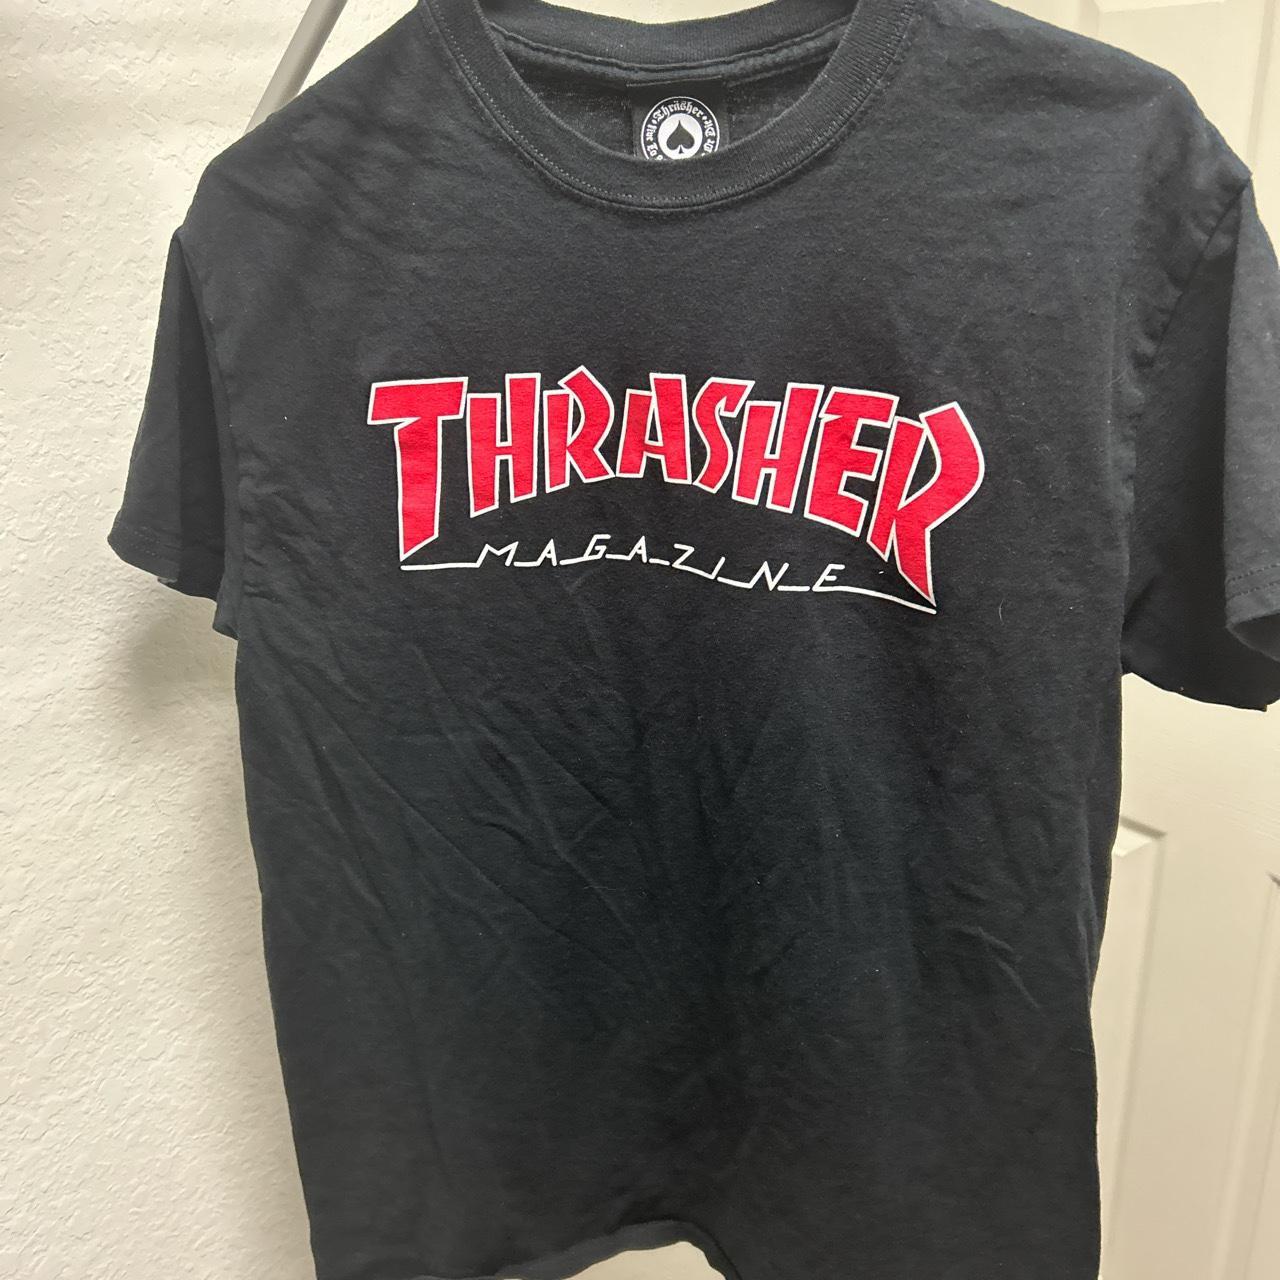 Thrasher Men's Grey and Red T-shirt (3)